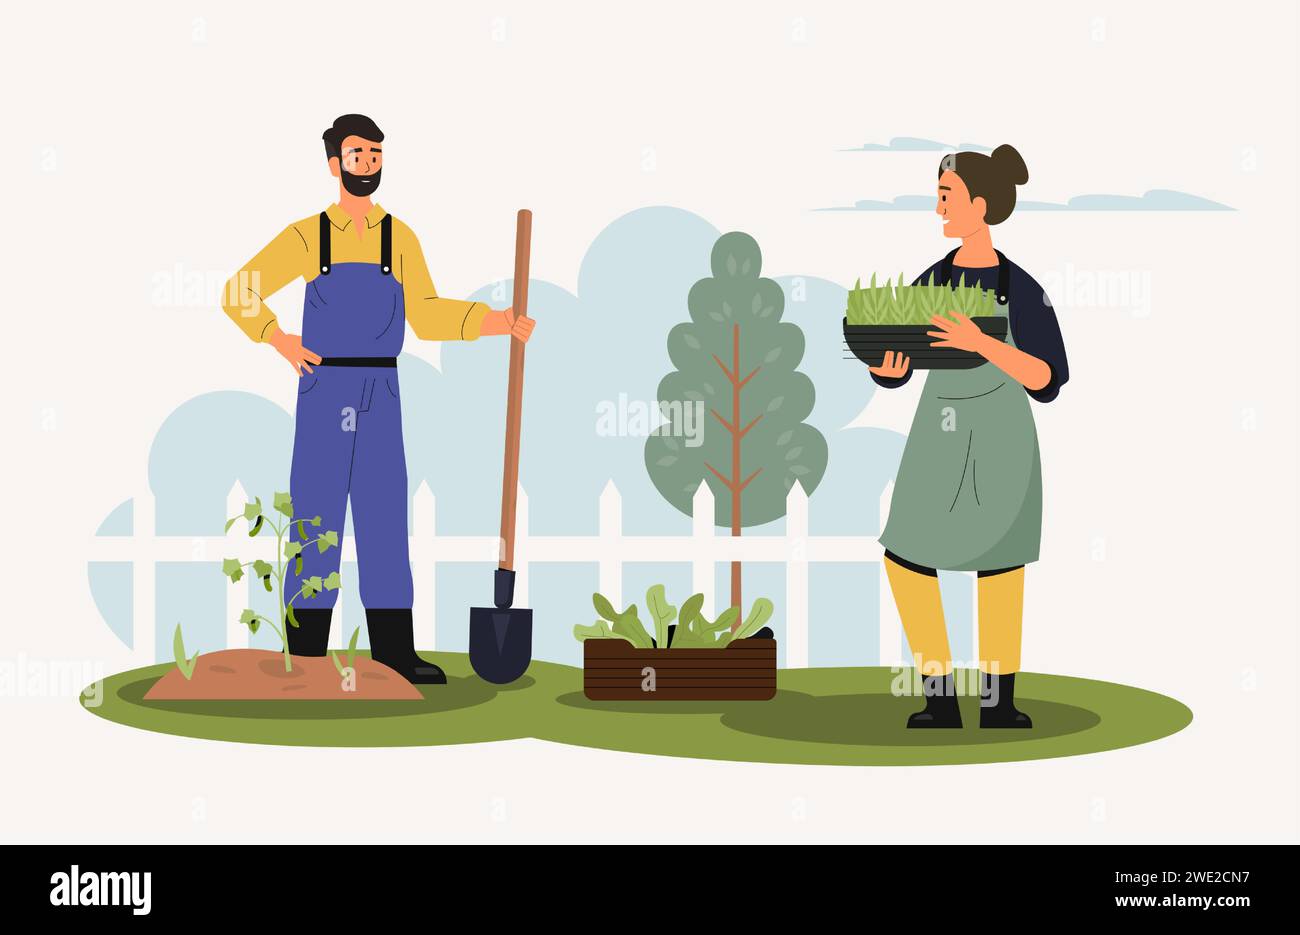 Agricultural employees working in garden with tools. Female and male characters growing vegetables Stock Vector